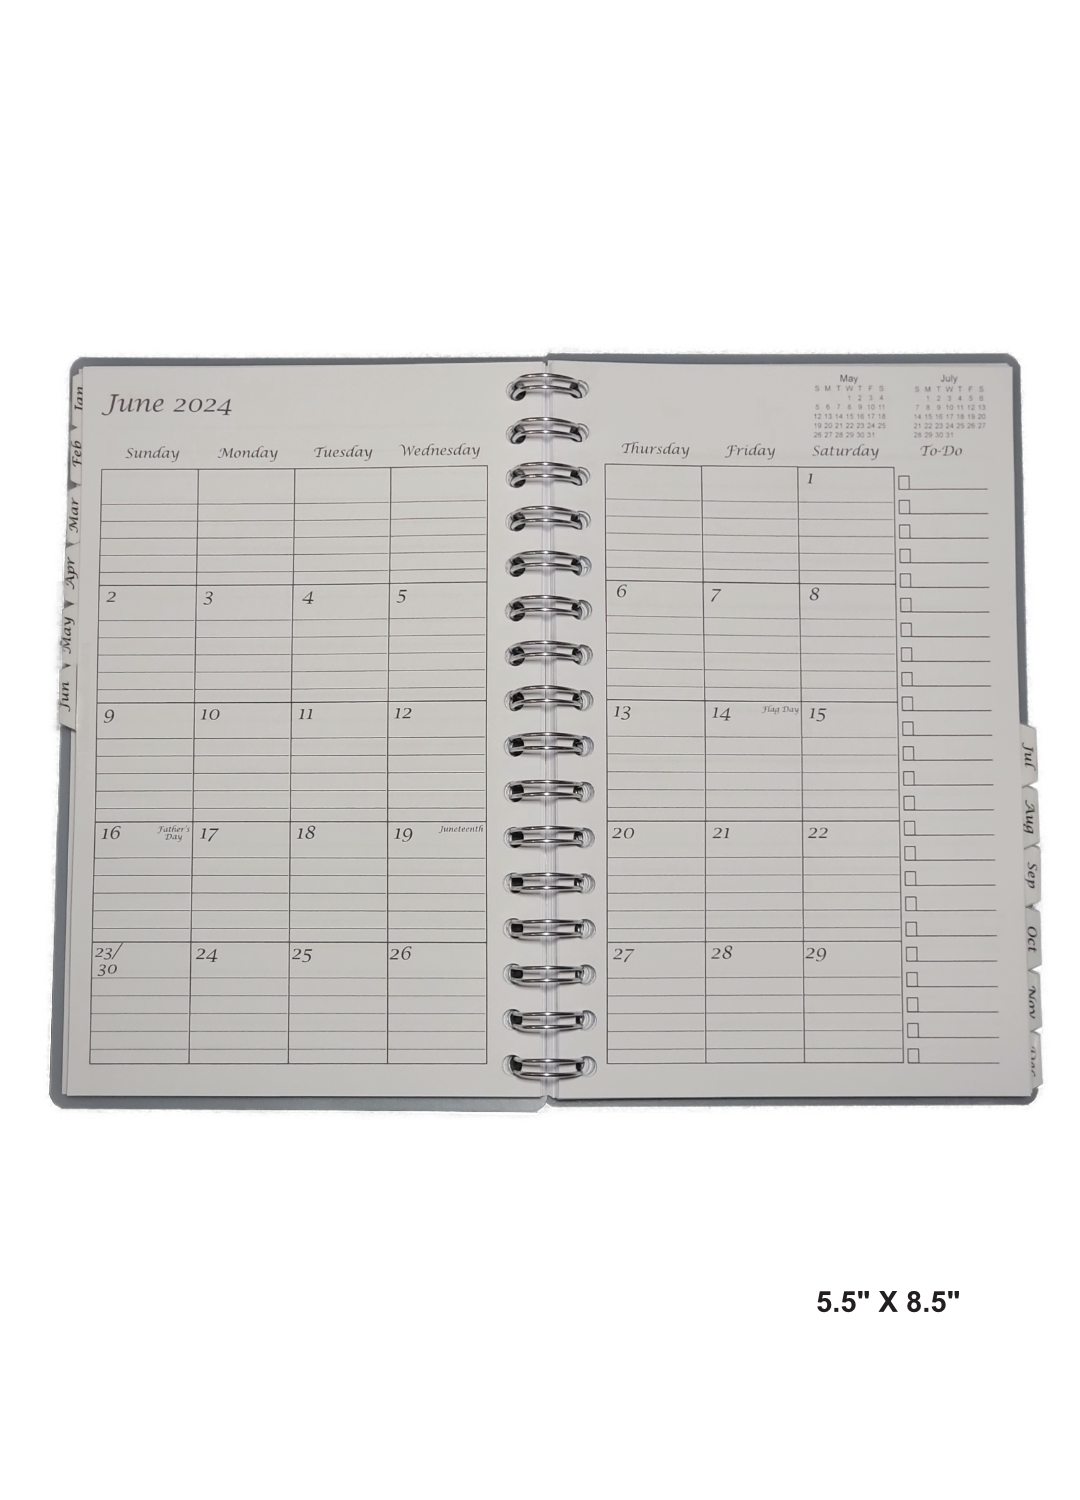 Inside view of a 5.5" x 8.5" hand-made 12 month planner with clean and organized layout. Each month has dedicated pages with ample writing space and clear headings. A practical and visually appealing tool for staying organized